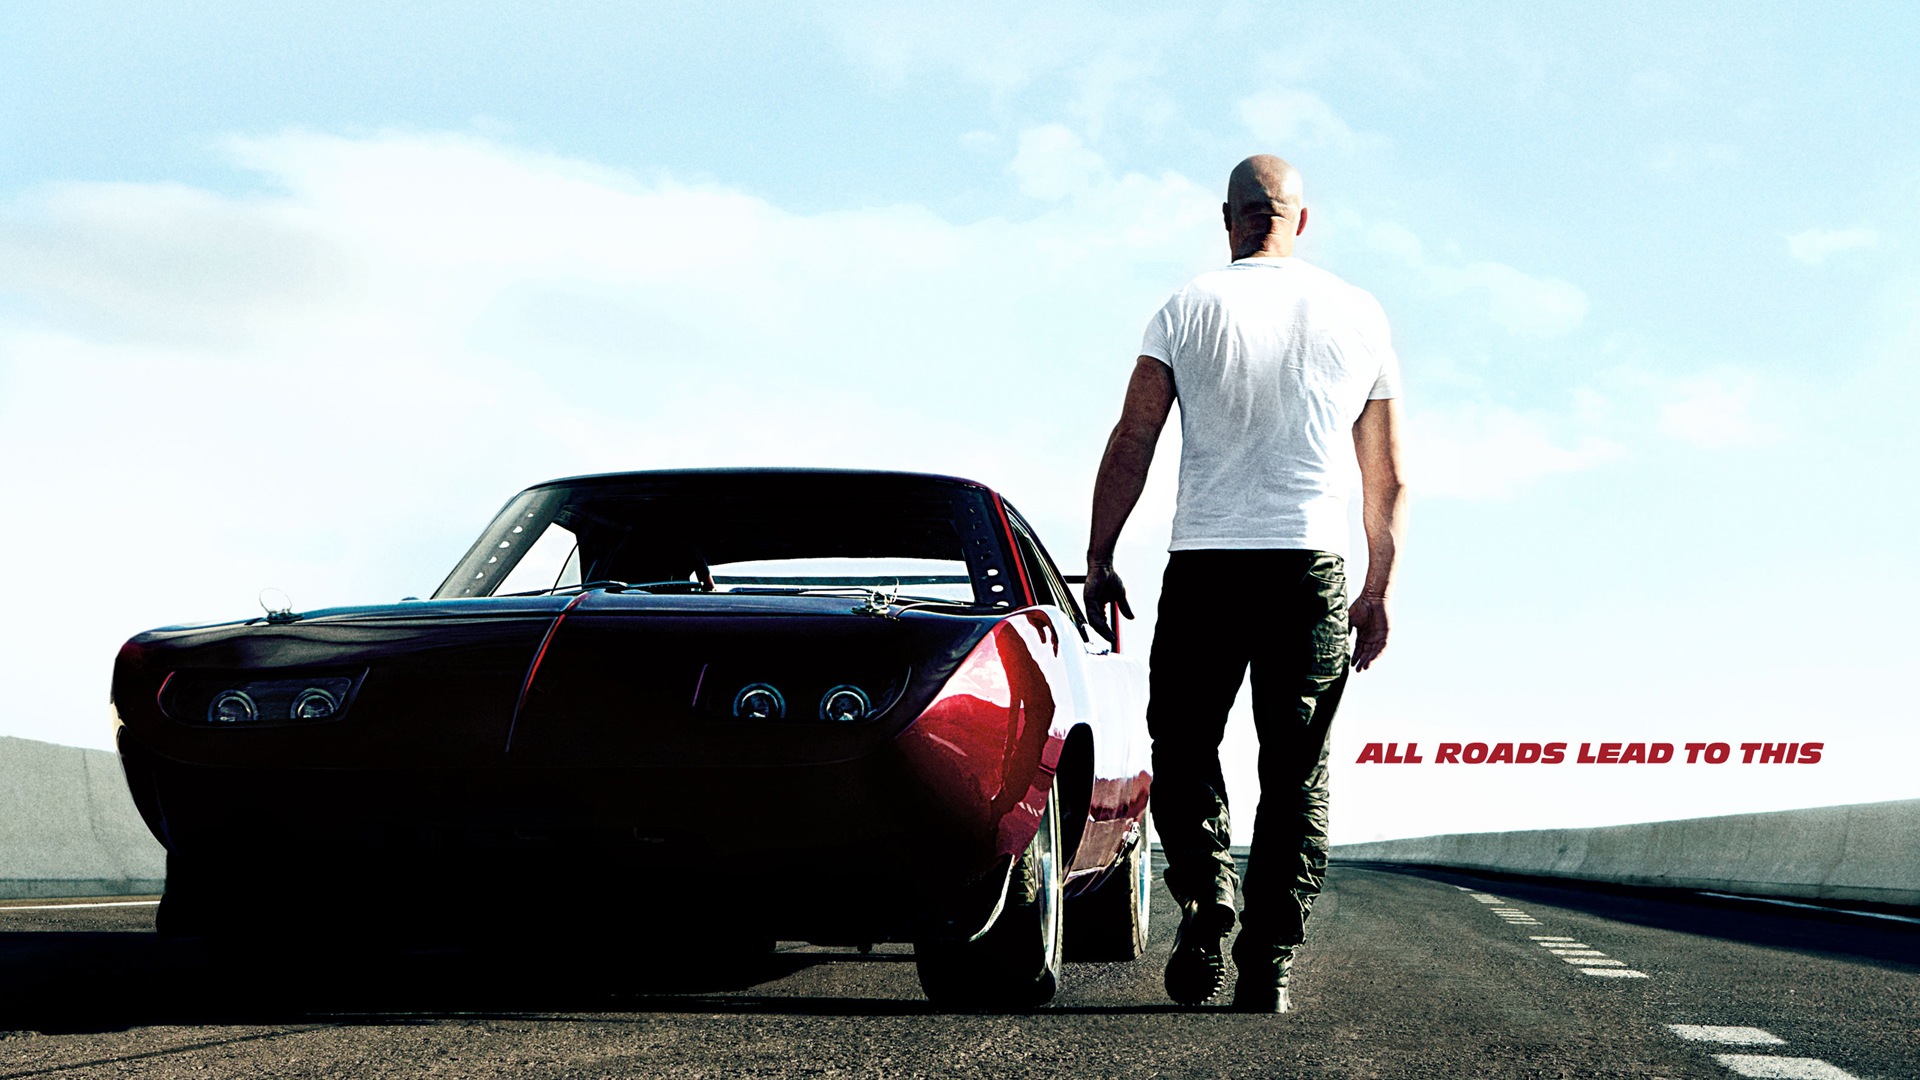 Fast And Furious 6 HD movie wallpapers #11 - 1920x1080